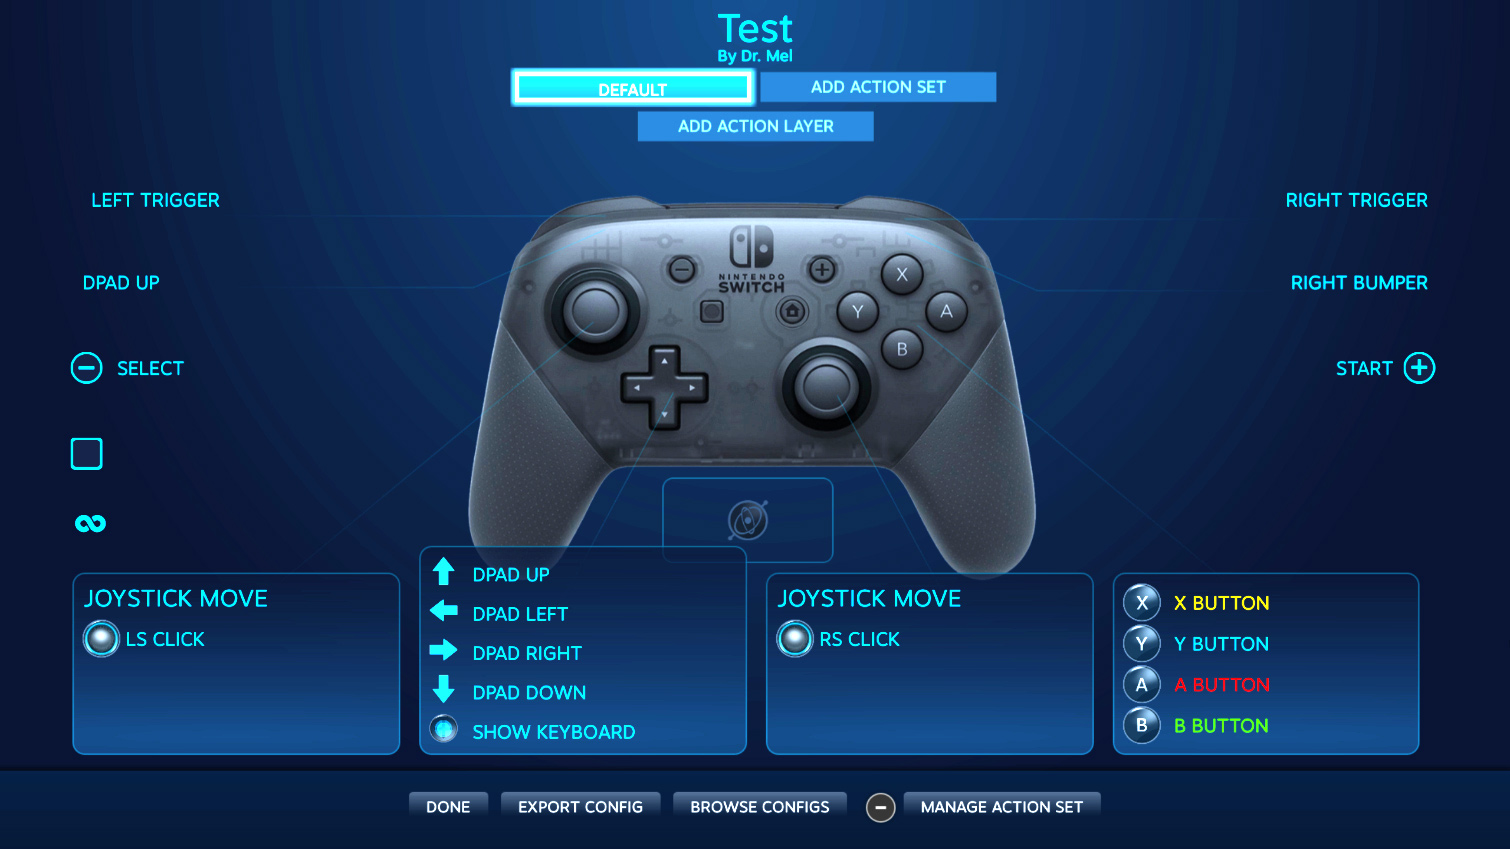 how to use switch controller on pc